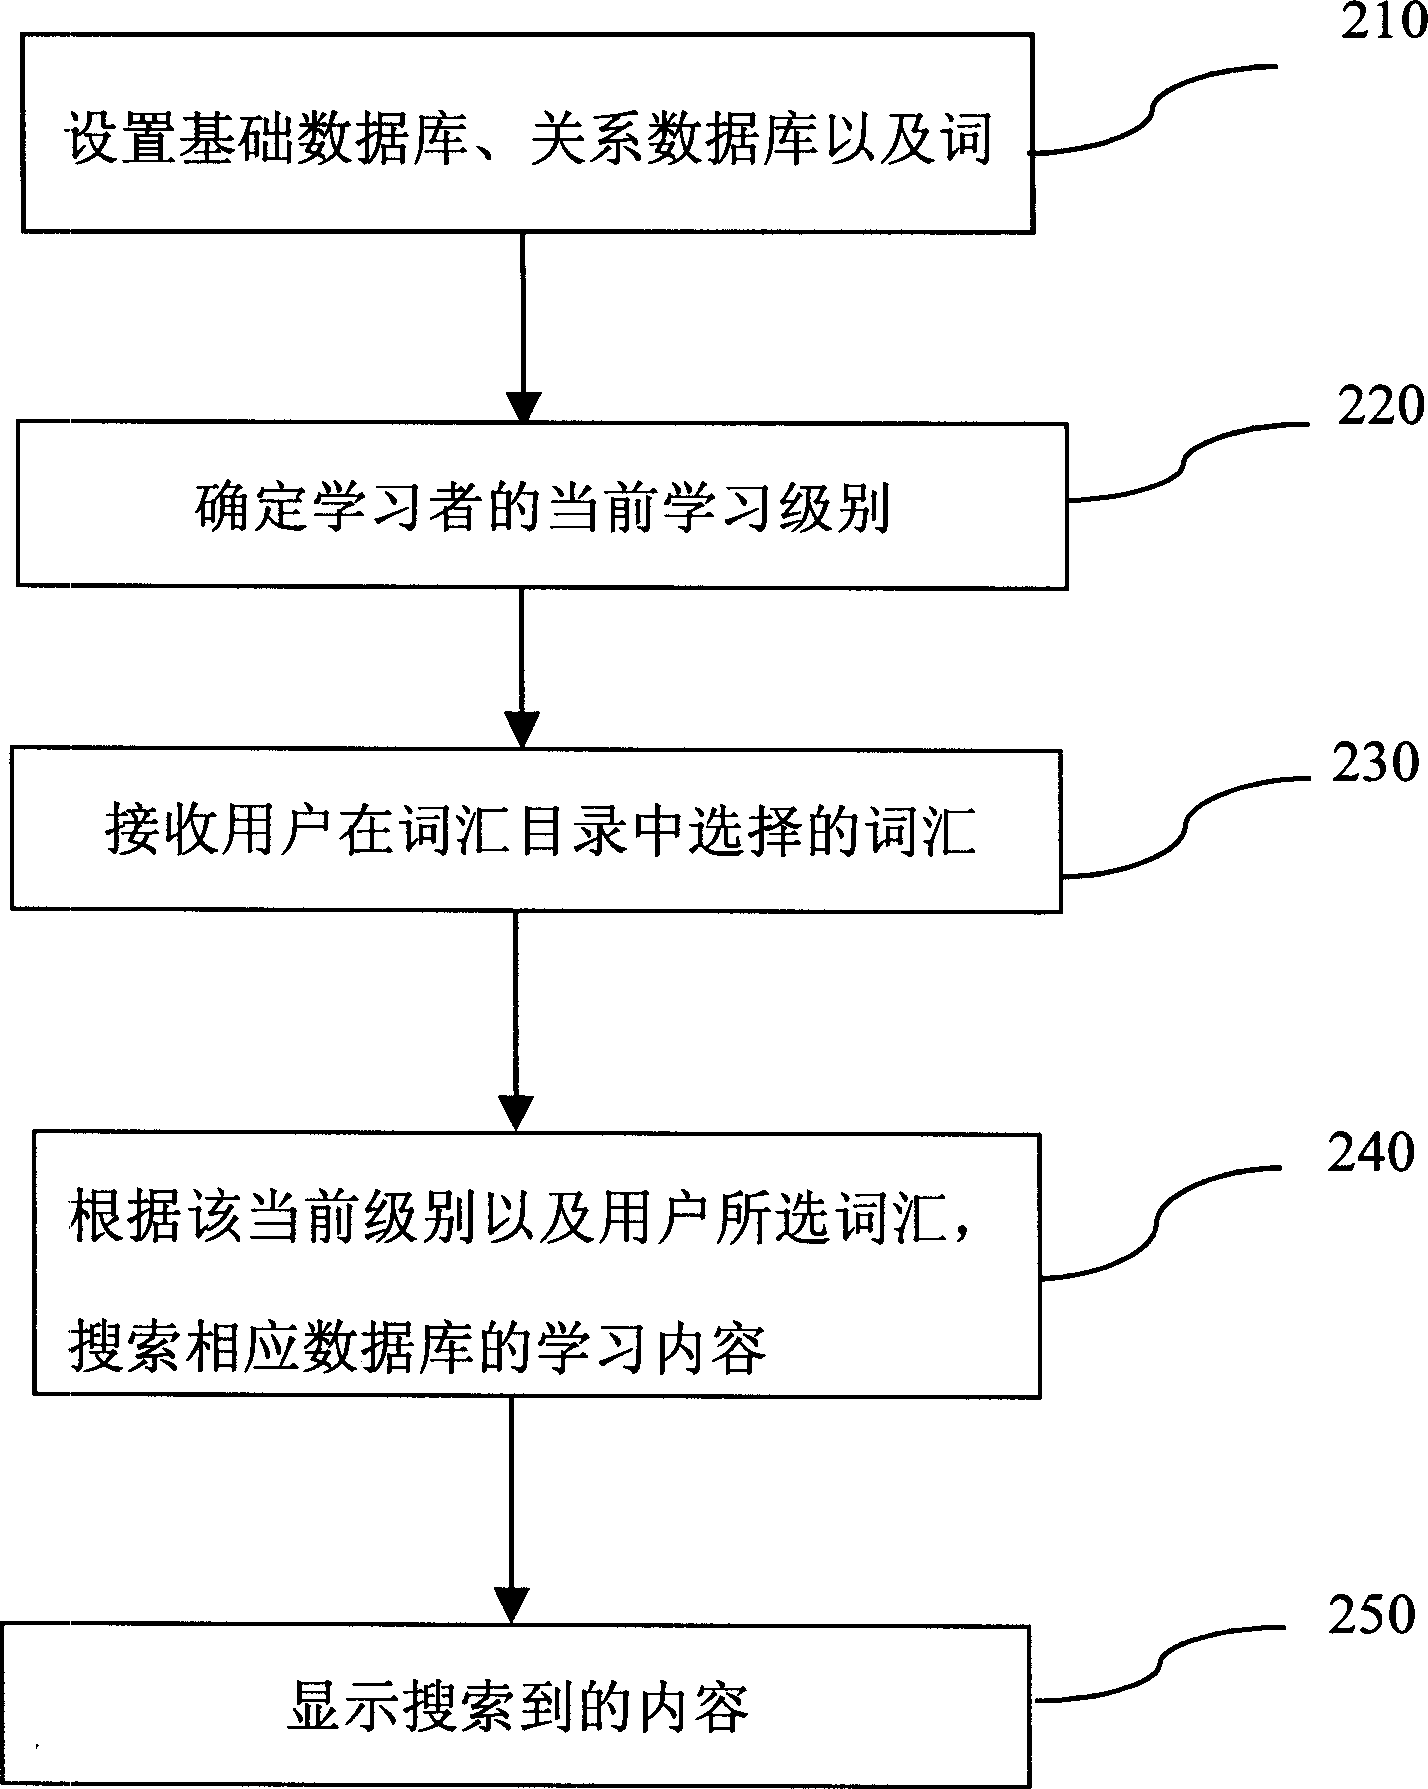 Divergent expanding type language study system and method